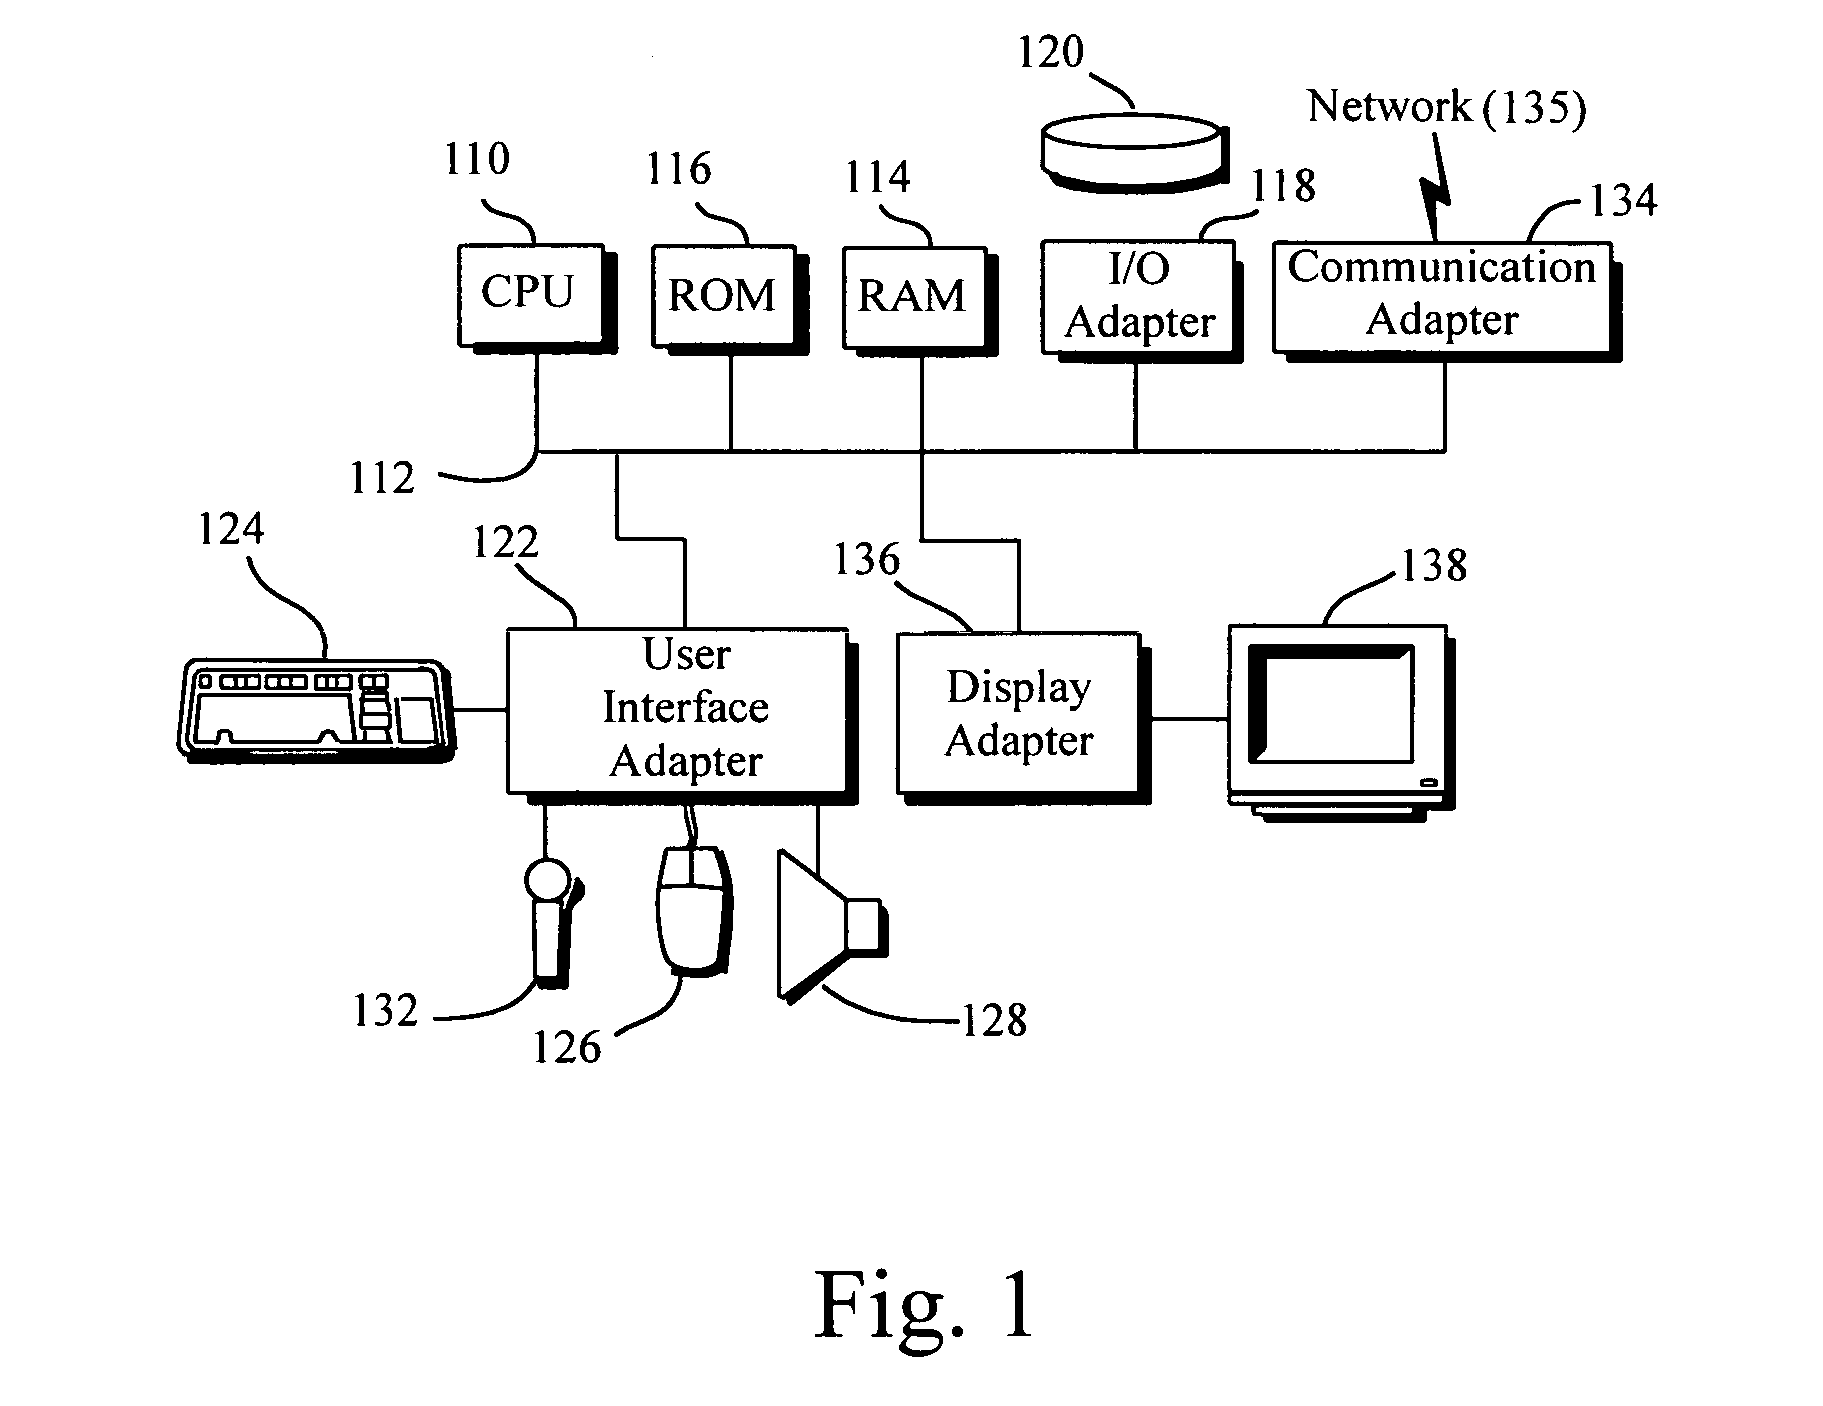 System, method and article of manufacture for a common cross platform framework for development of DVD-Video content integrated with ROM content